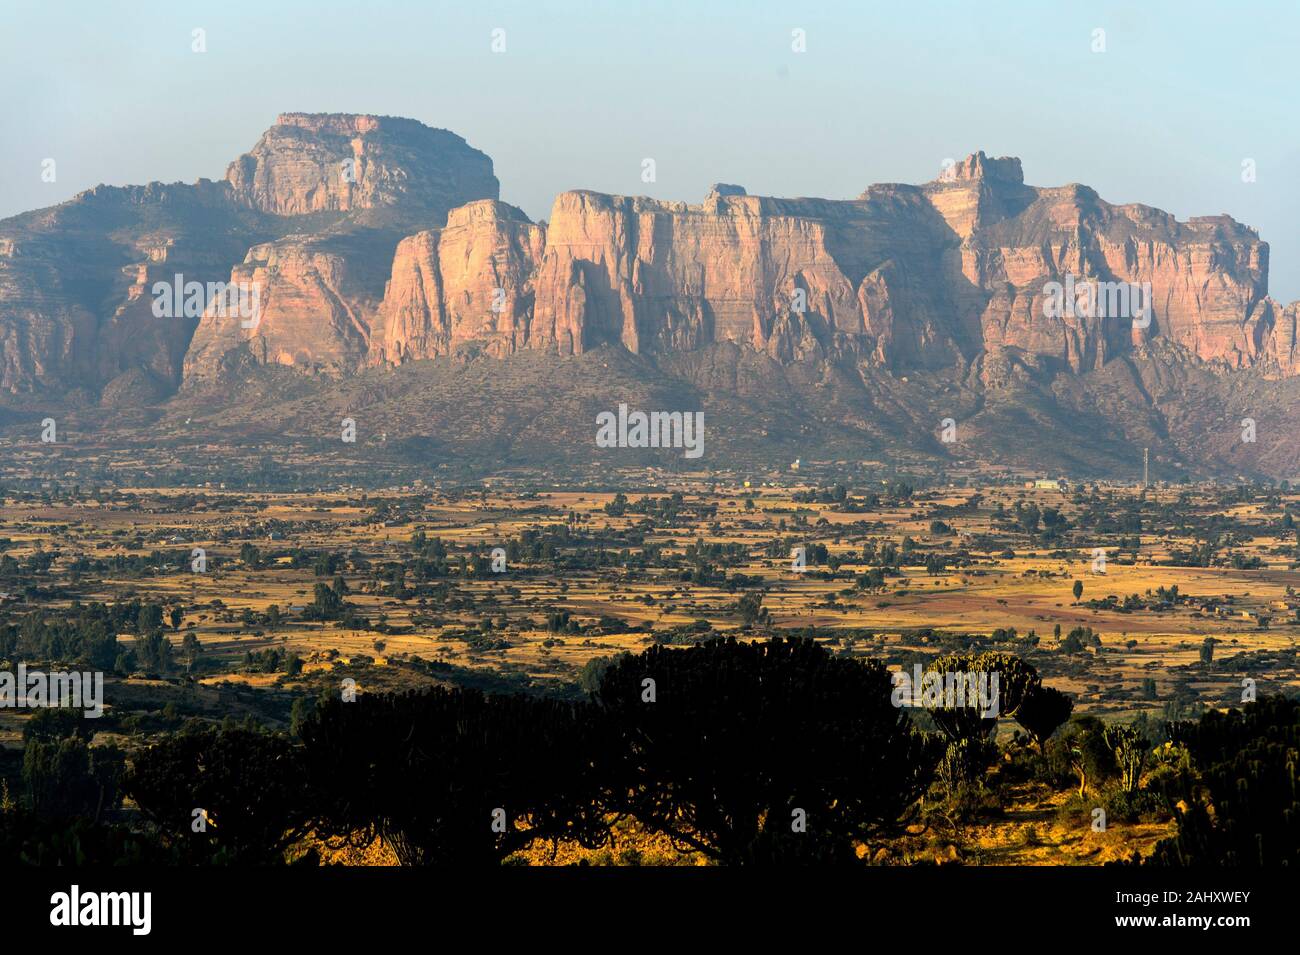 Gheralta Mountains rising from the Hawzien plain, northern part of the East African Rift Valley, Hawzien, Tigray, Ethiopia. Stock Photo